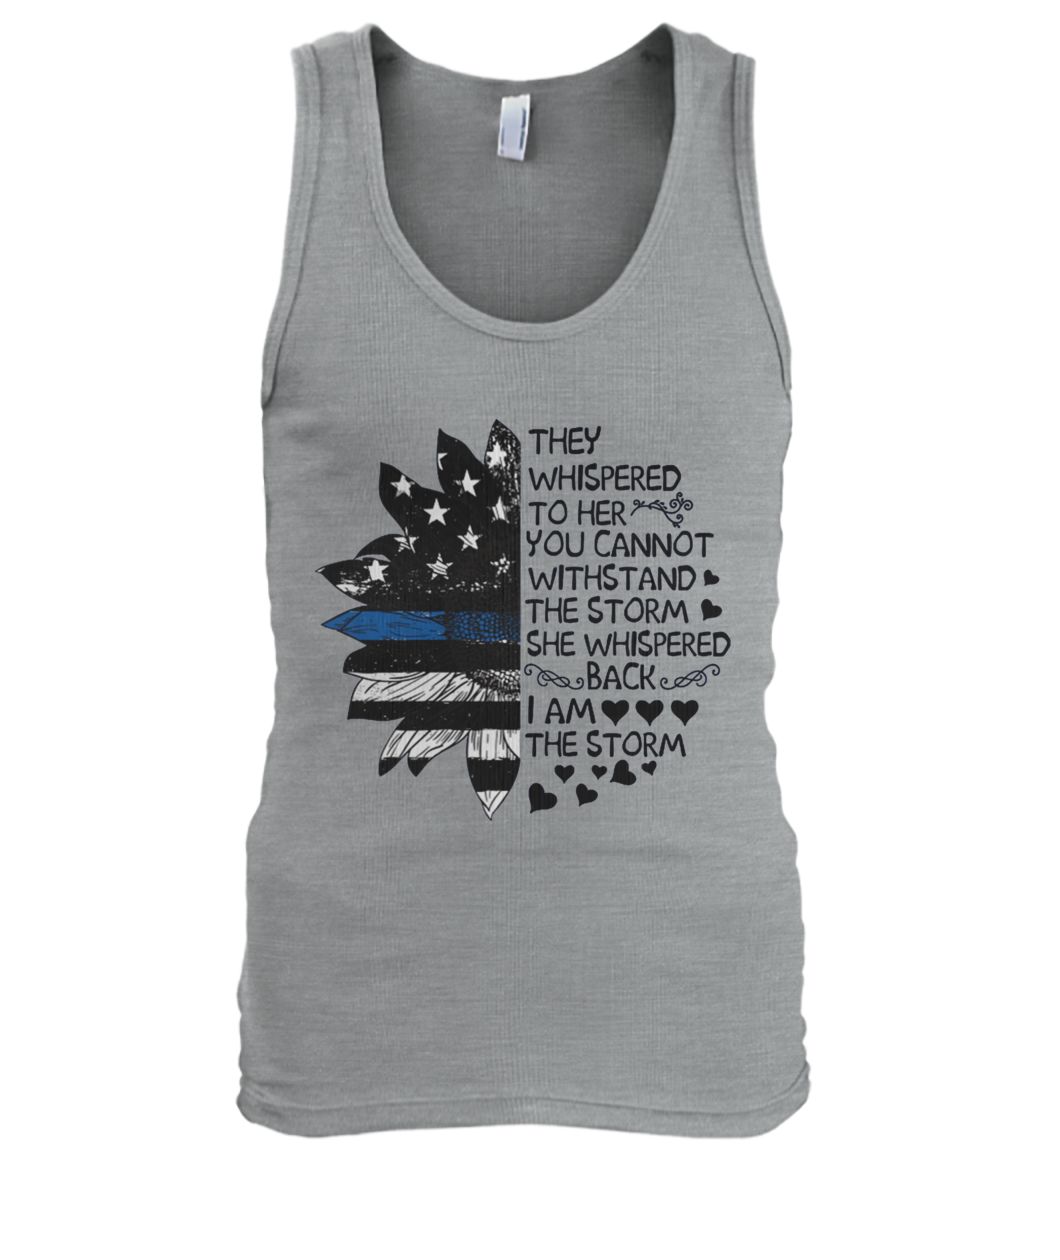 They whispered to her you cannot withstand the storm she whispered back sunflower men's tank top